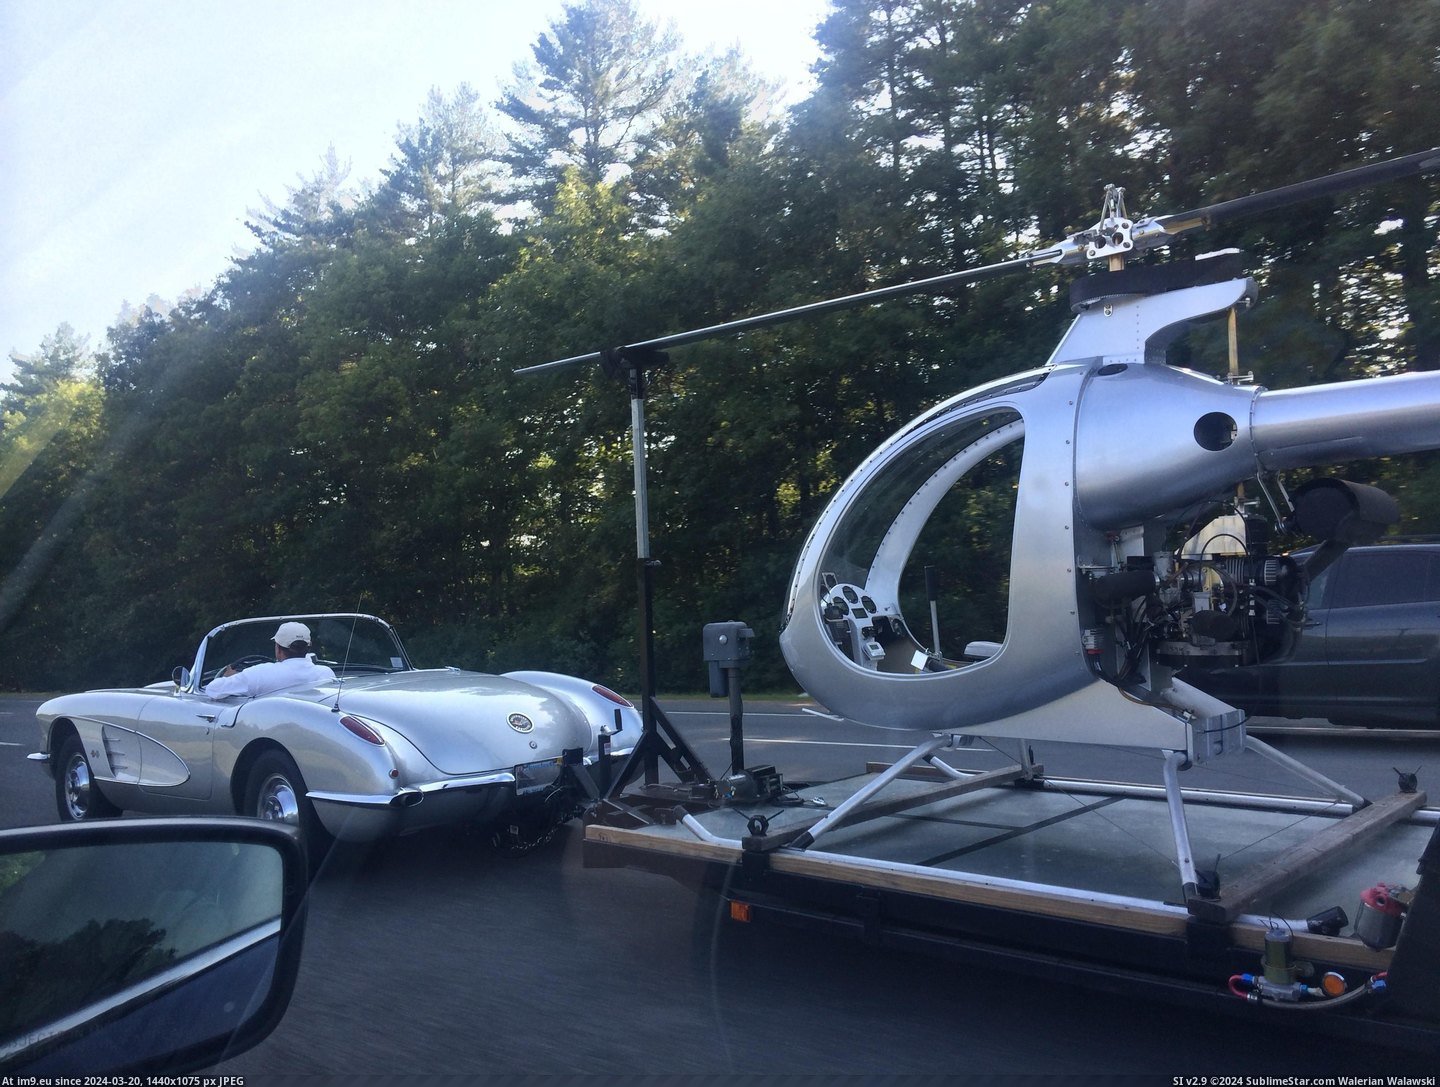 #Guy #Life #Towing #Corvette #Helicopter #Winning [Pics] 50's corvette towing a helicopter. this guy is winning at life. Pic. (Obraz z album My r/PICS favs))